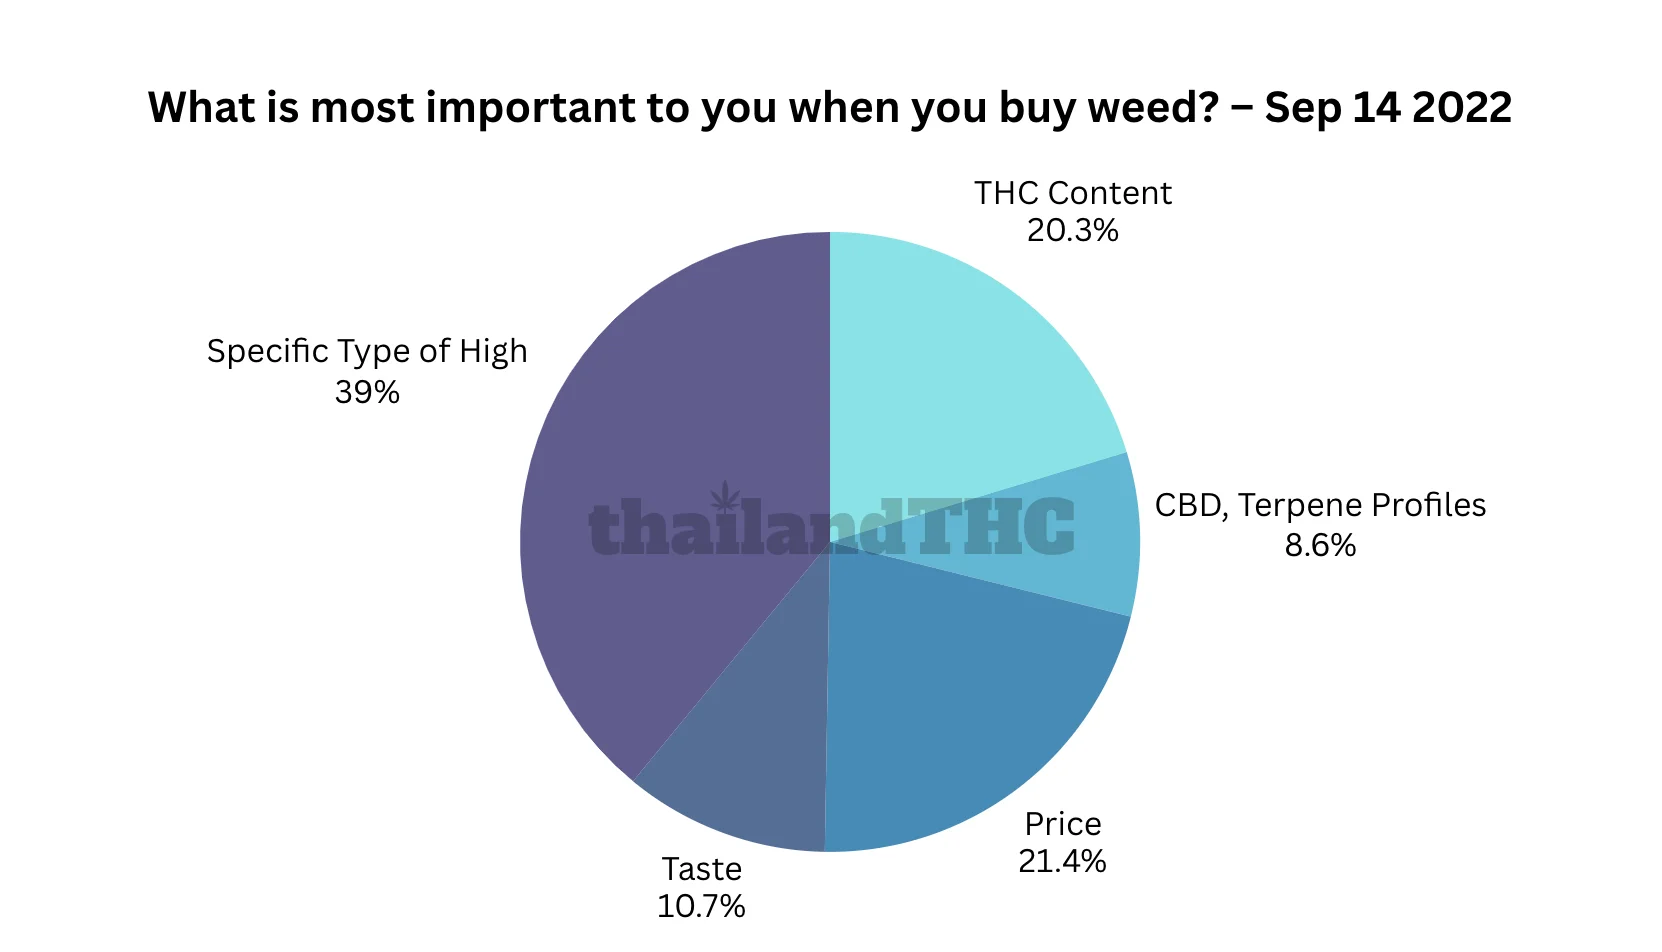 What is most important to you when you buy weed?